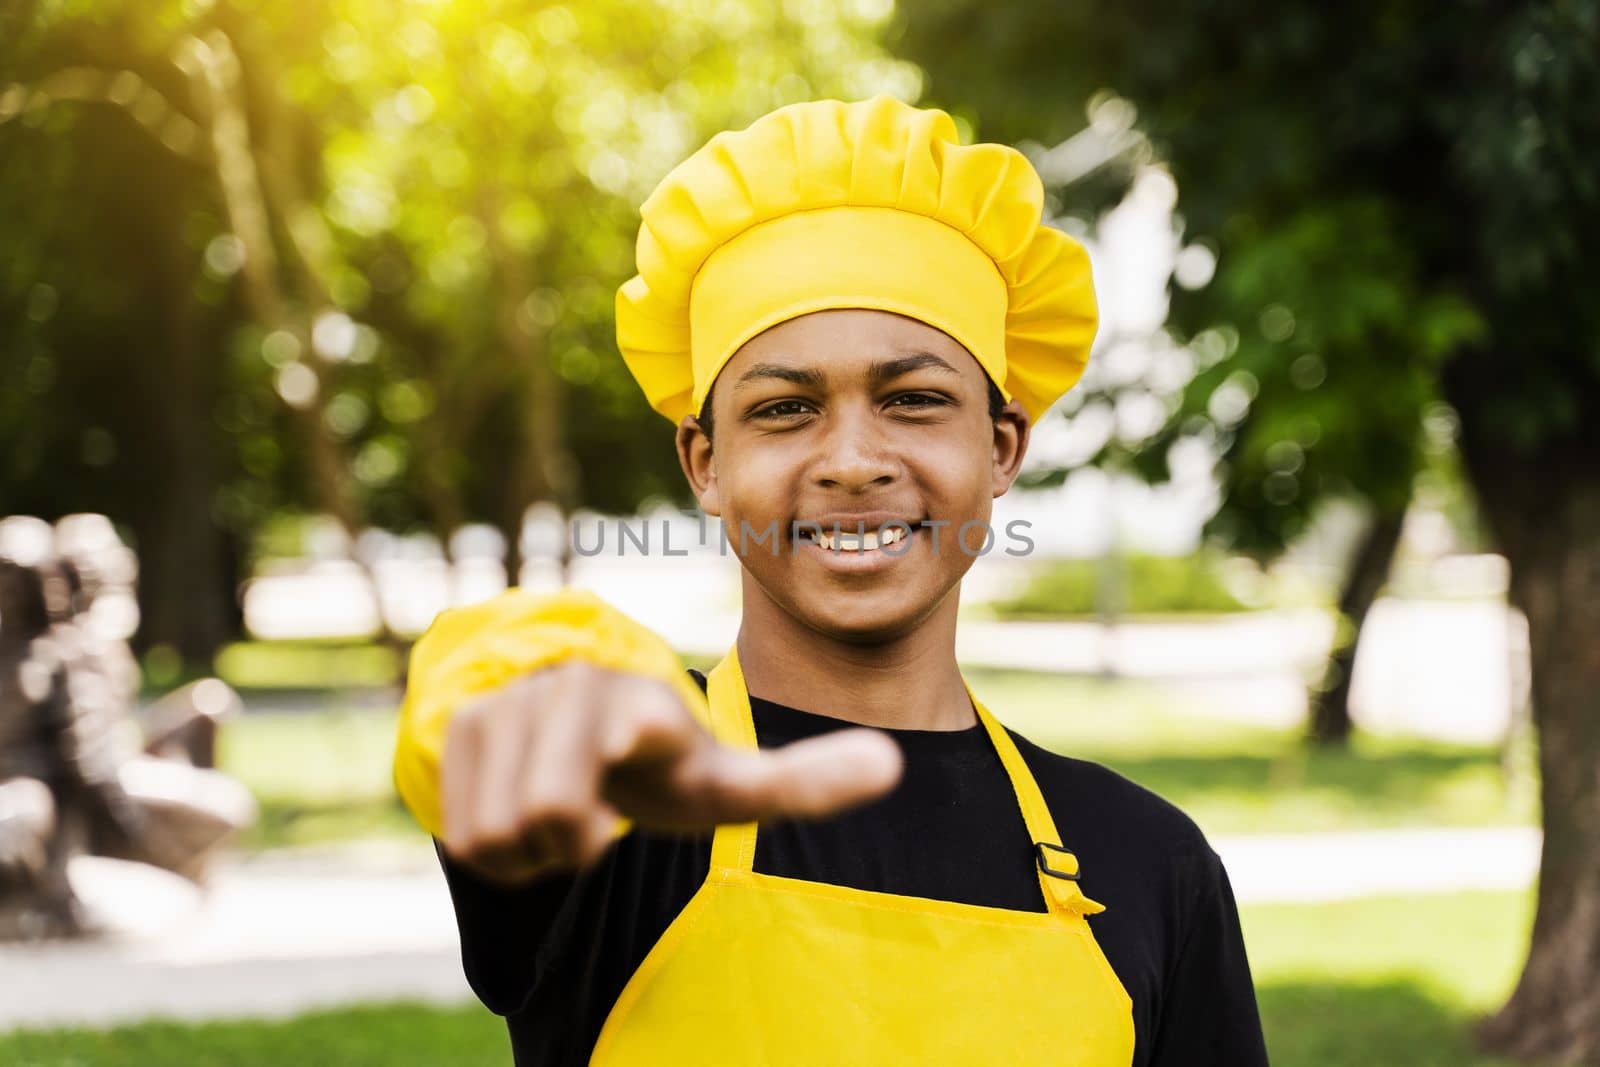 Handsome african teenager cook points to you. Black child cook in chefs hat and yellow apron uniform smiling and pointing to you outdoor. Creative advertising for cafe or restaurant.